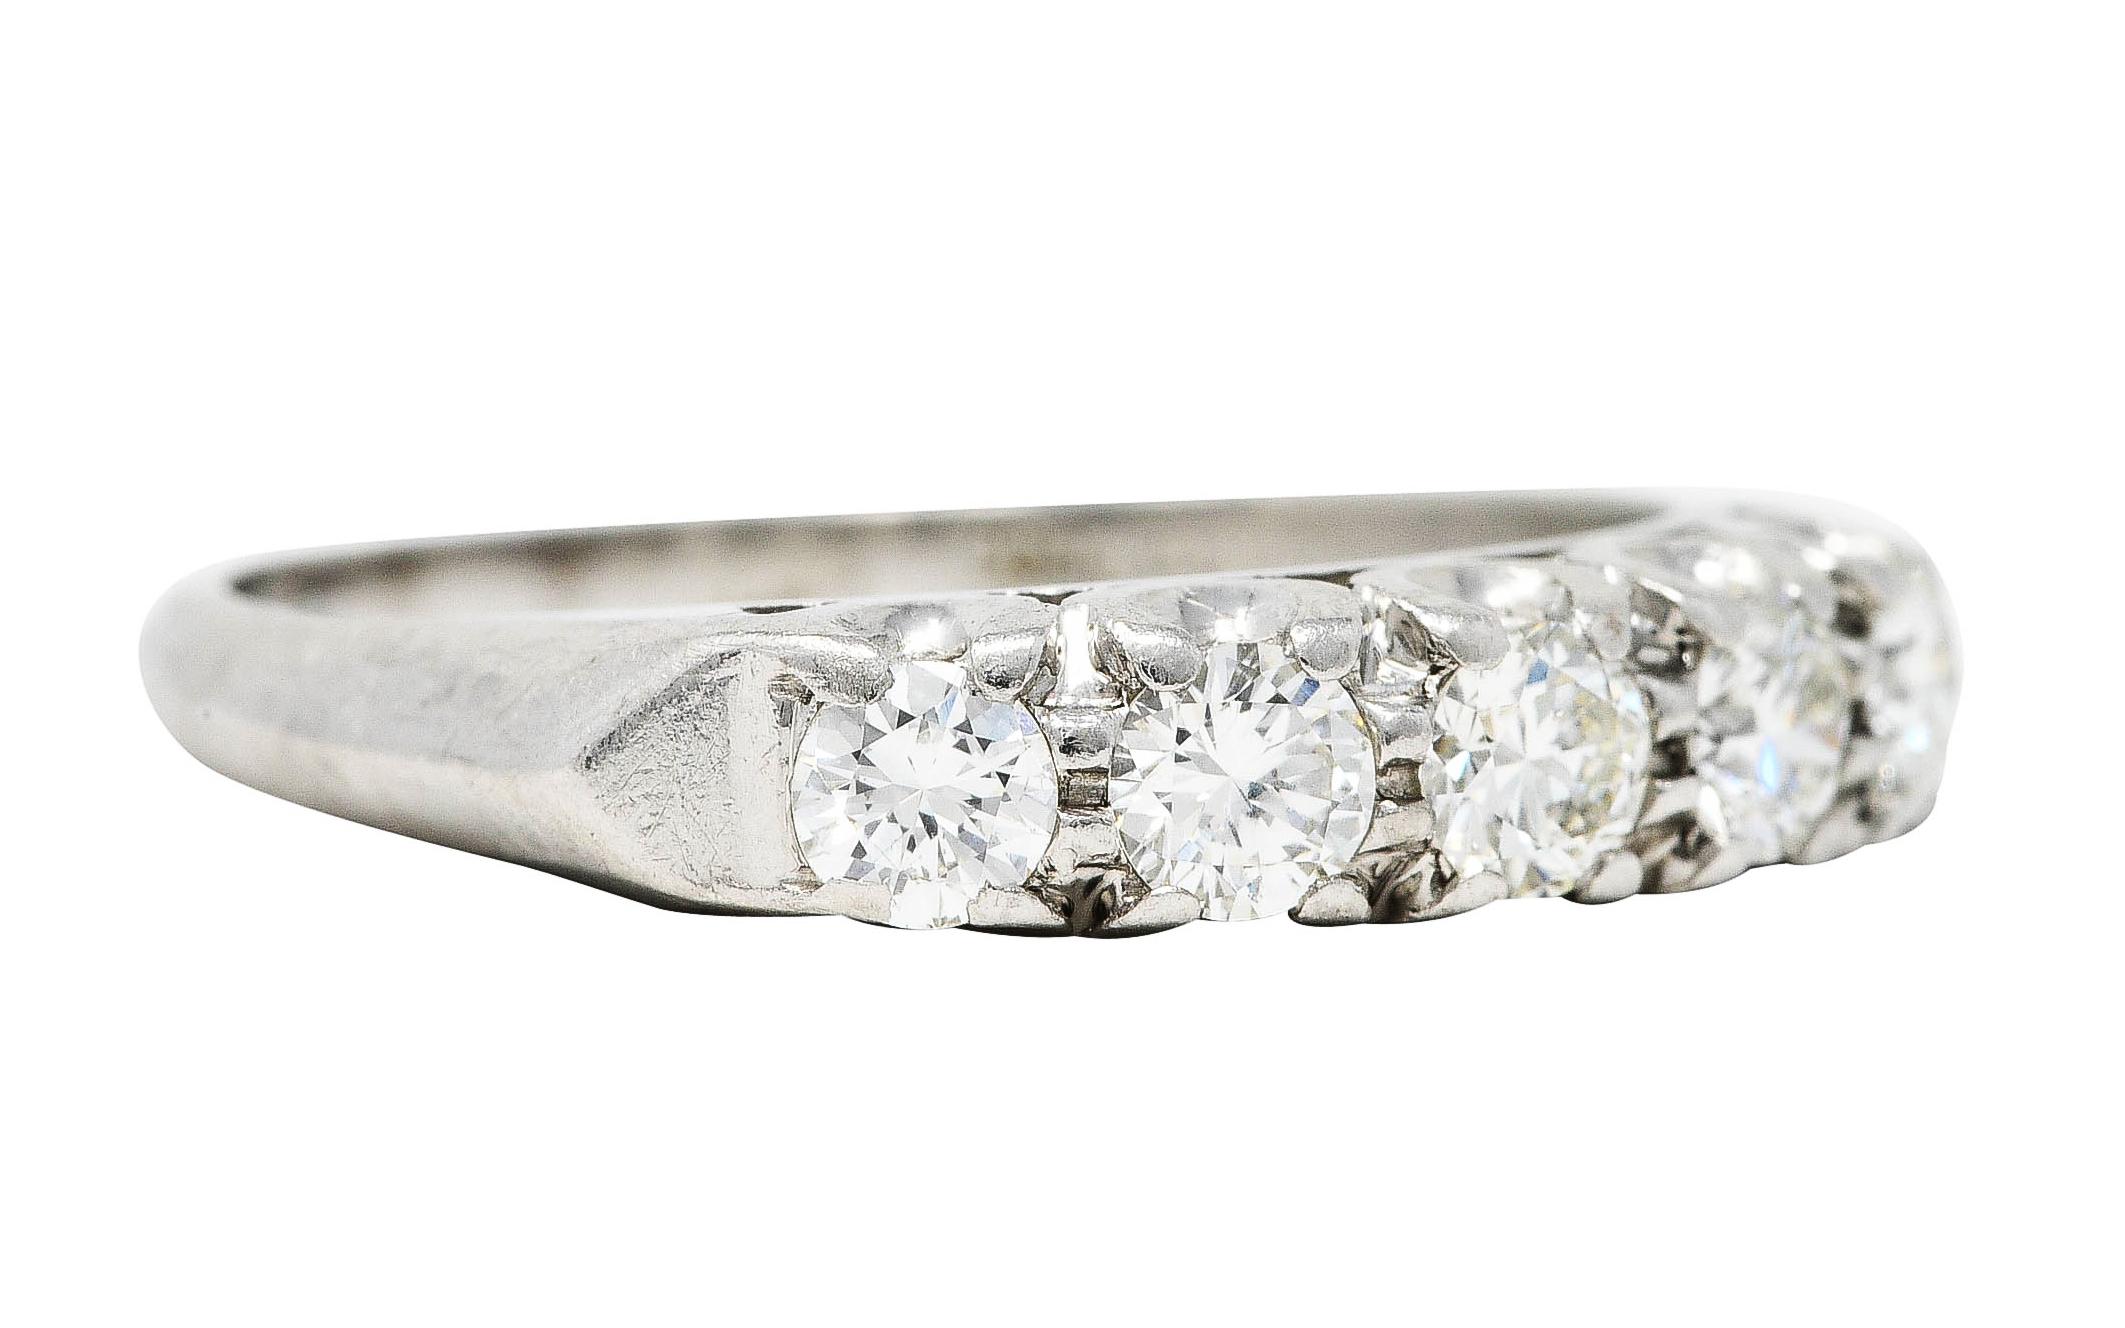 Band ring centers five prong set round brilliant cut diamonds

Weighing approximately 0.50 carat - G/H in color with VS clarity

Accented by angular knife's edge shoulders

With pierced fishtail profile

Stamped for platinum

Circa: 1950's

Ring